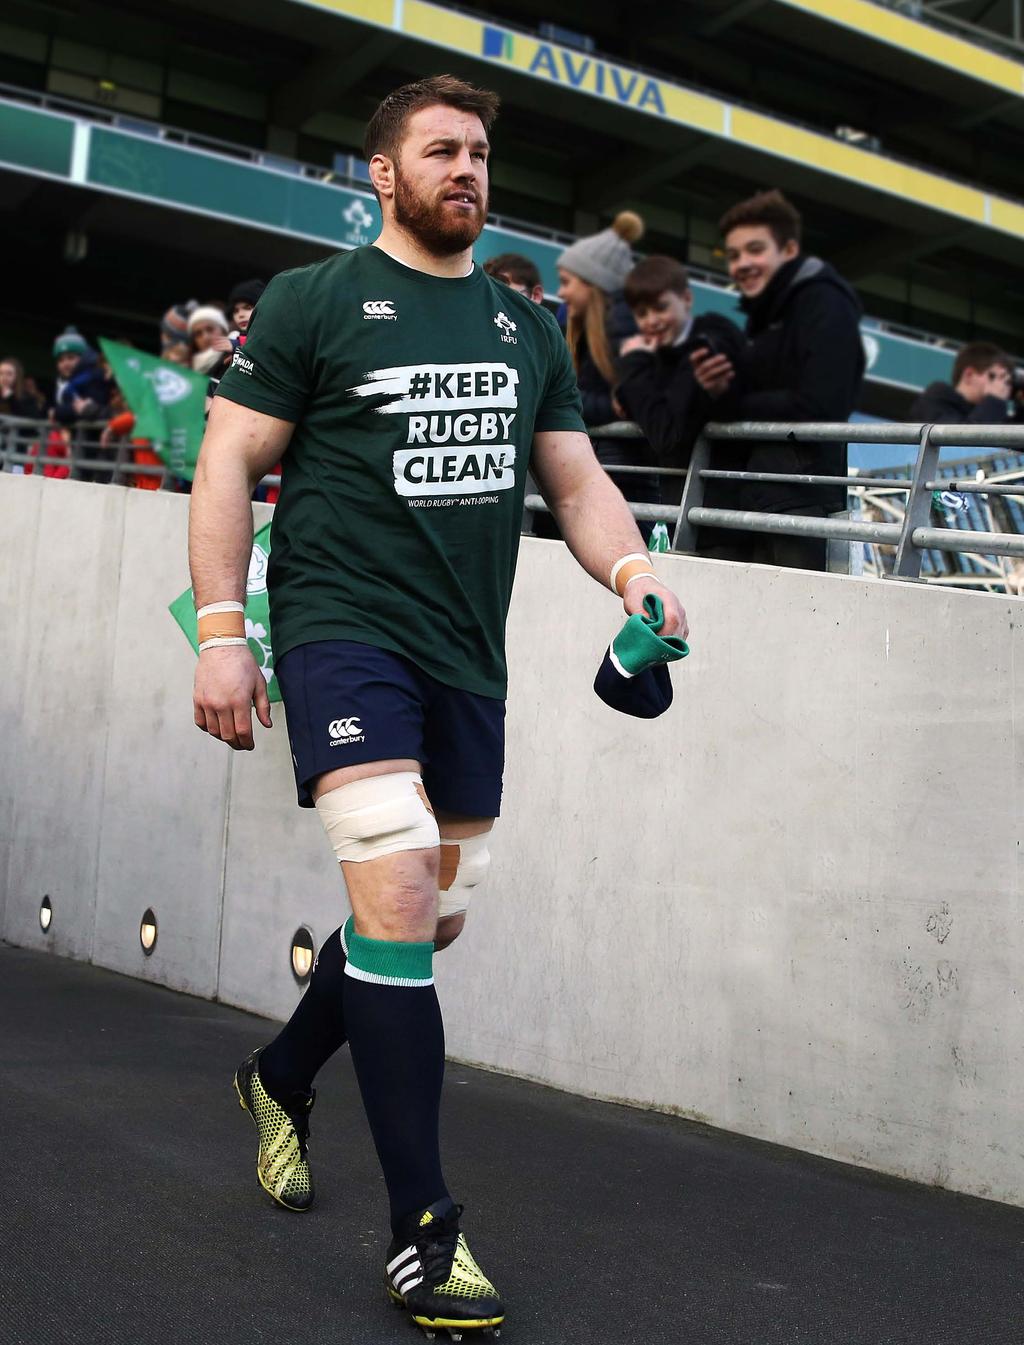 Ireland squad show their support for the campaign at a training session at Wembley Stadium for Rugby World Cup 25 POSITIVE TESTS IN IRISH RUGBY Season Positive